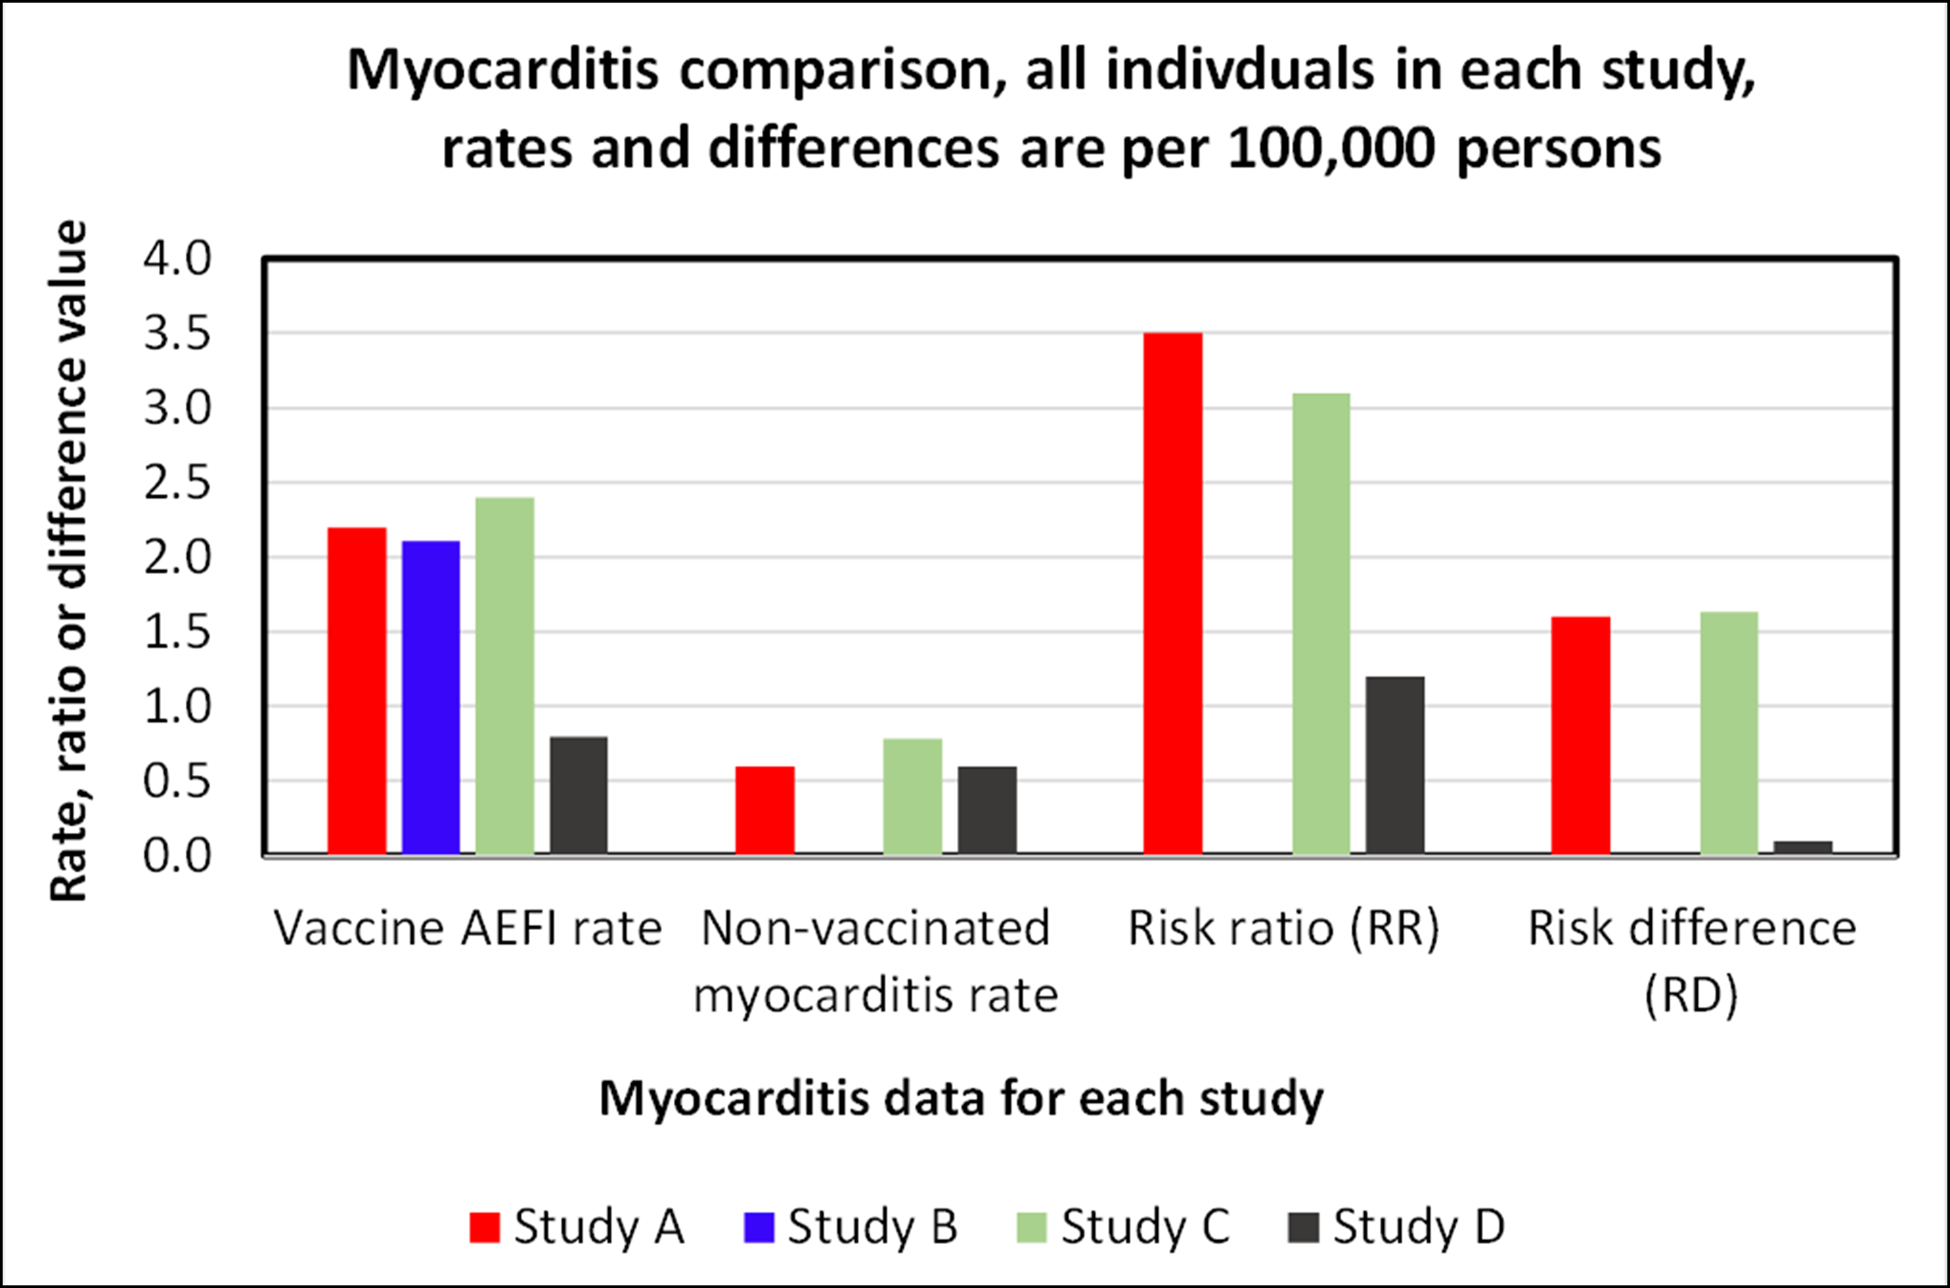 Analysis of severe events following COVID vaccine shows increased incidence of myocarditis and lymphadenopathy